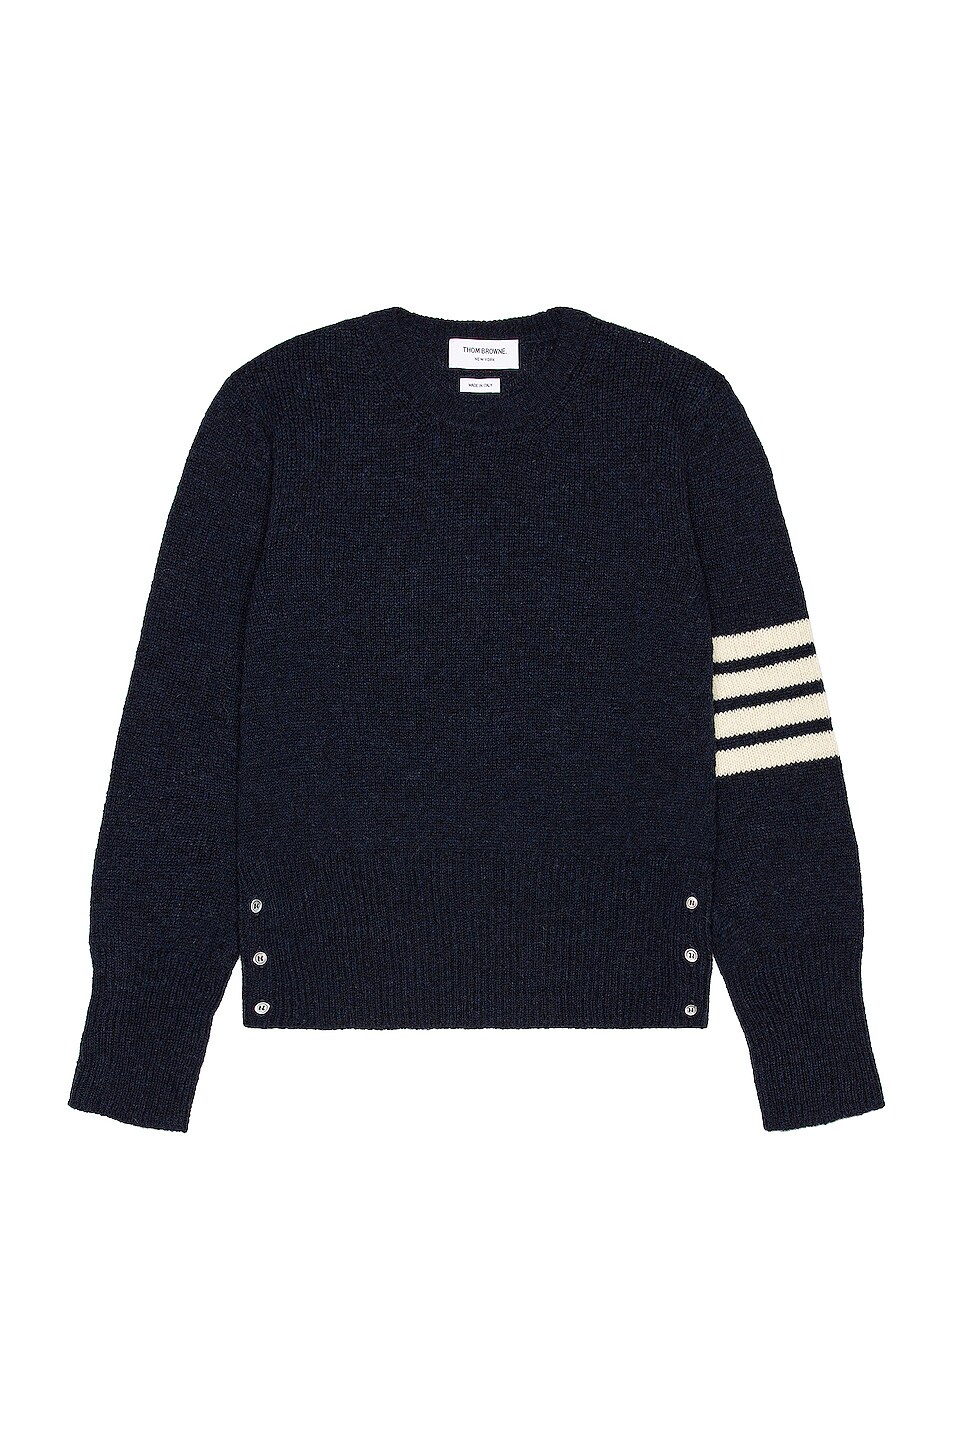 Image 1 of Thom Browne 4 Bar Crewneck Pullover in Navy